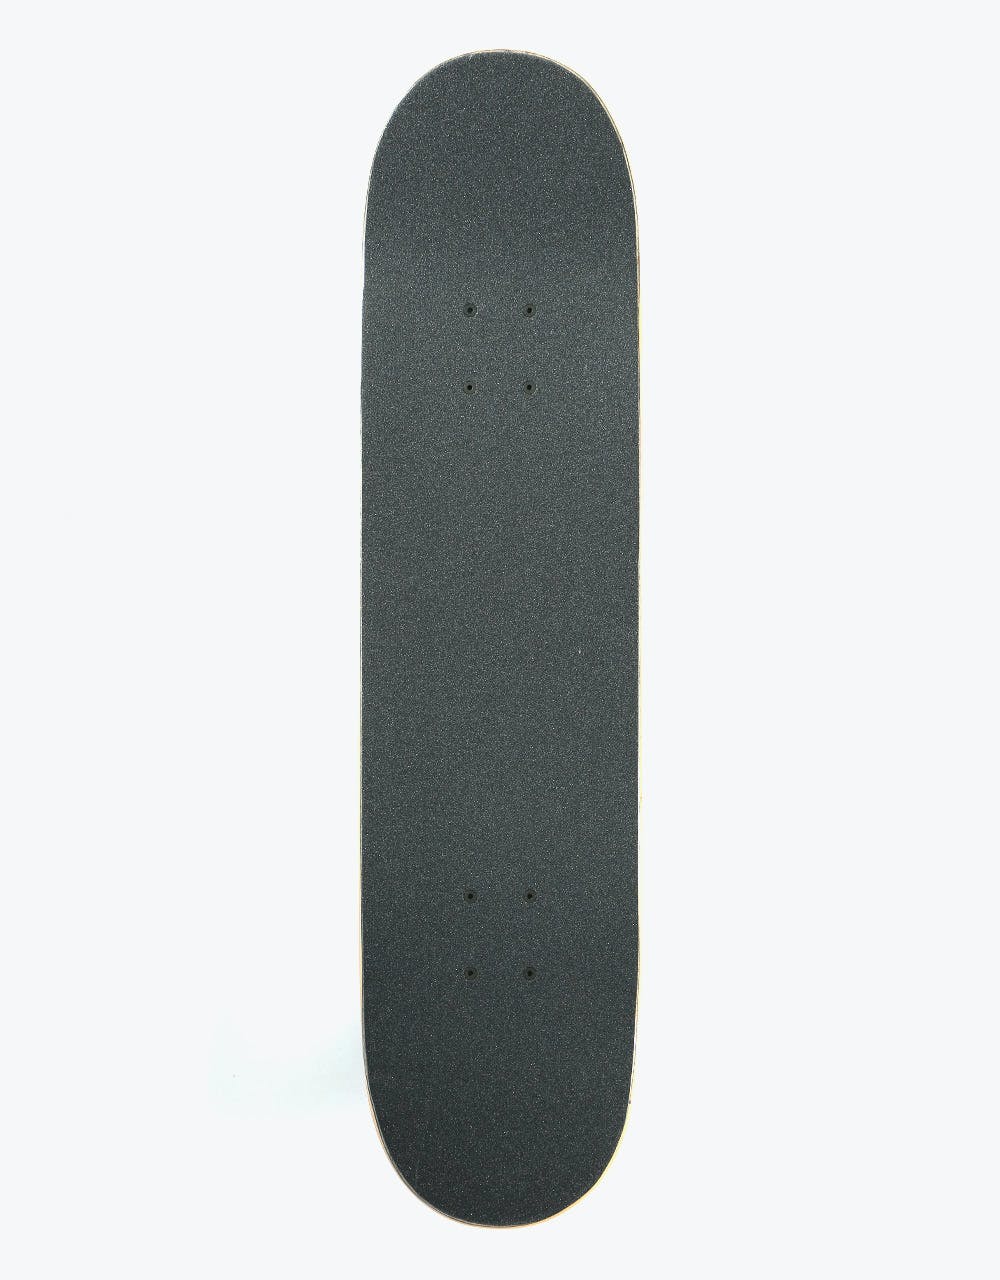 Route One Planet Complete Skateboard - 7.75"